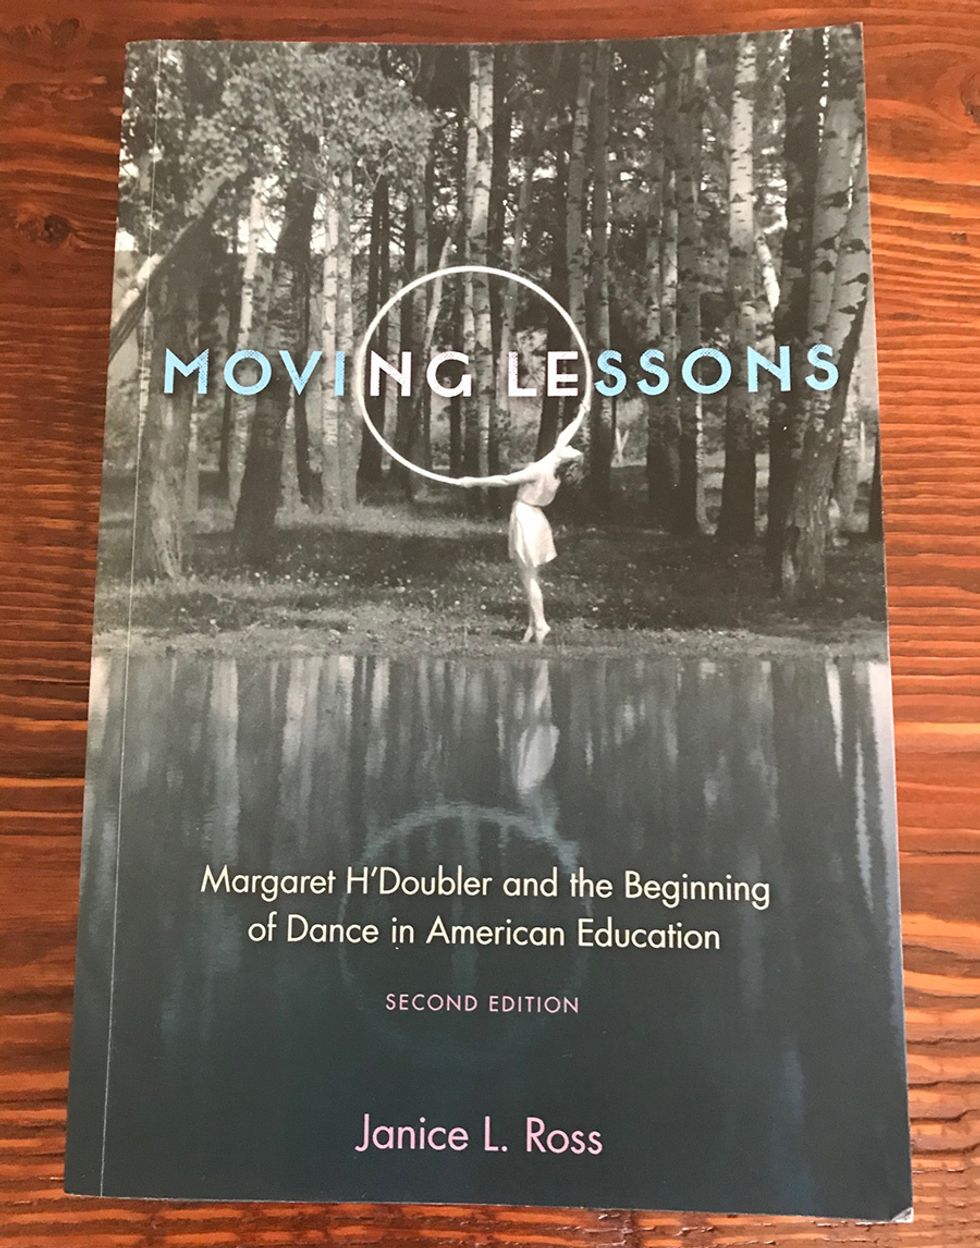 The cover of Moving Lessons, featuring a black and white photo of a woman dancing outside with a large hula hoop-type prop